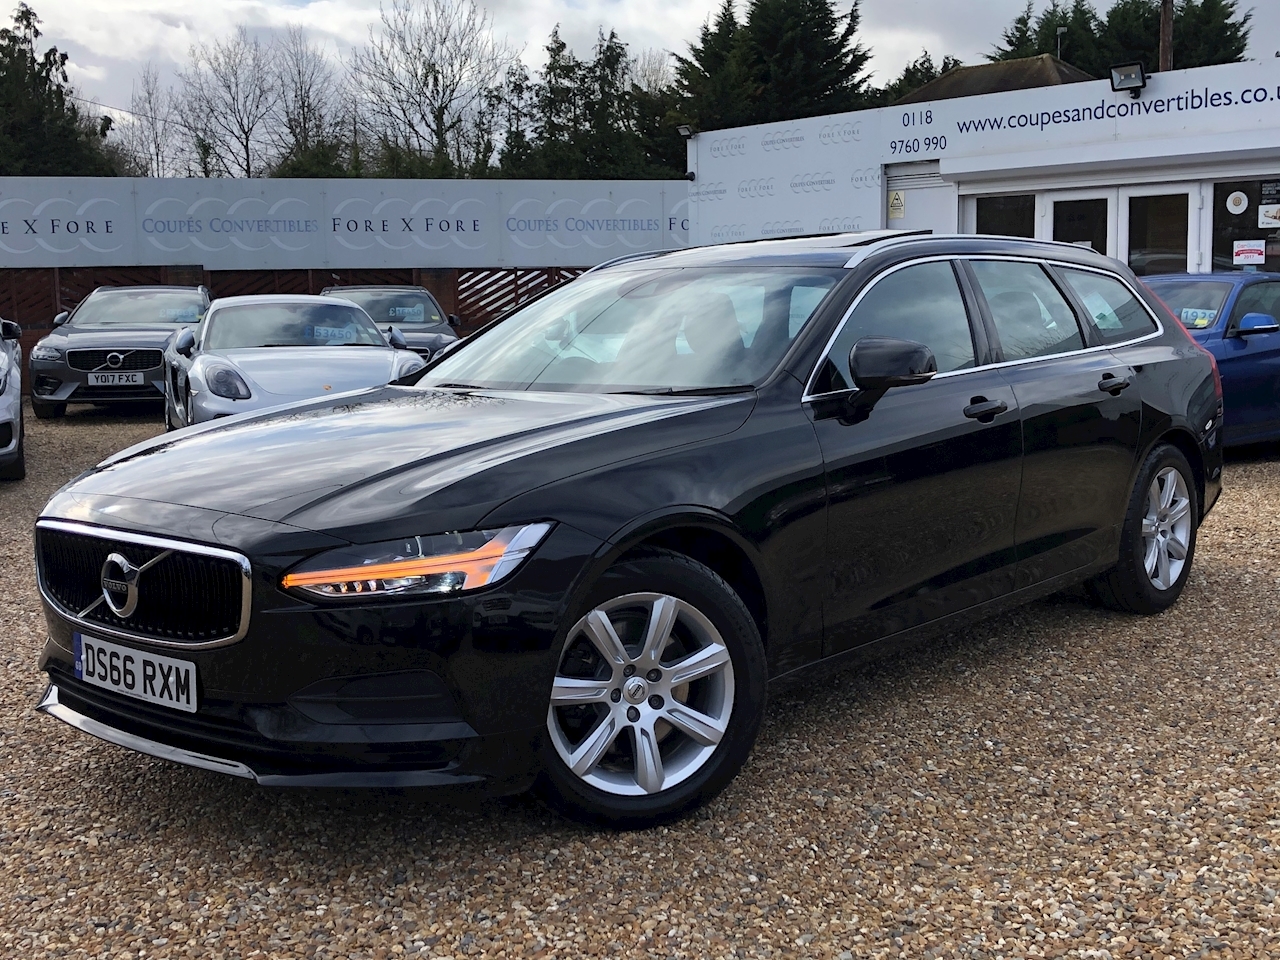 V90 D4 Momentum Panoramic roof 2.0 5dr Estate Automatic Diesel